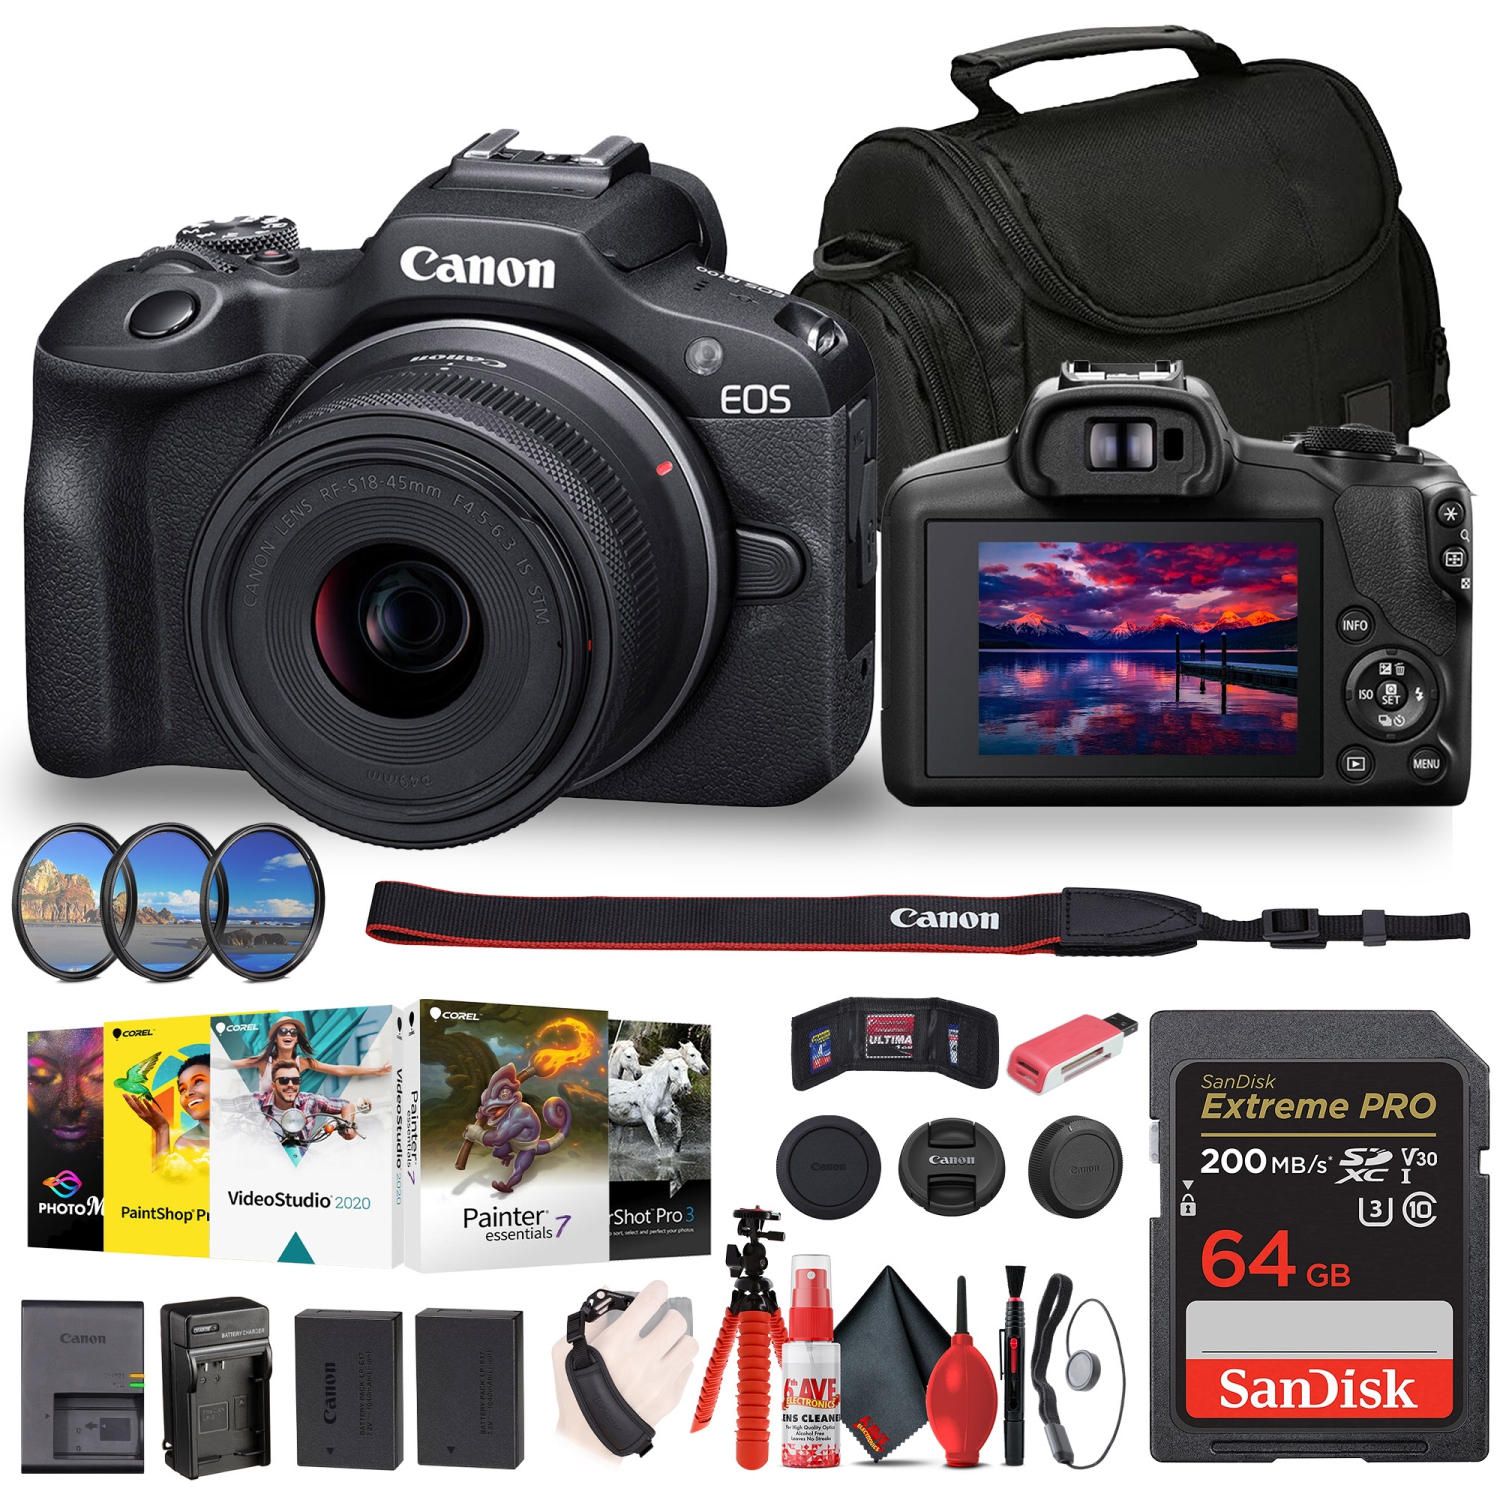 Canon EOS R100 Mirrorless Camera with 18-45mm Lens (6052C012) + Filter Kit + Corel Photo Software + Bag + 64GB Card + LPE17 Battery + Charger + Card Reader + Flex Tripod + Cleaning